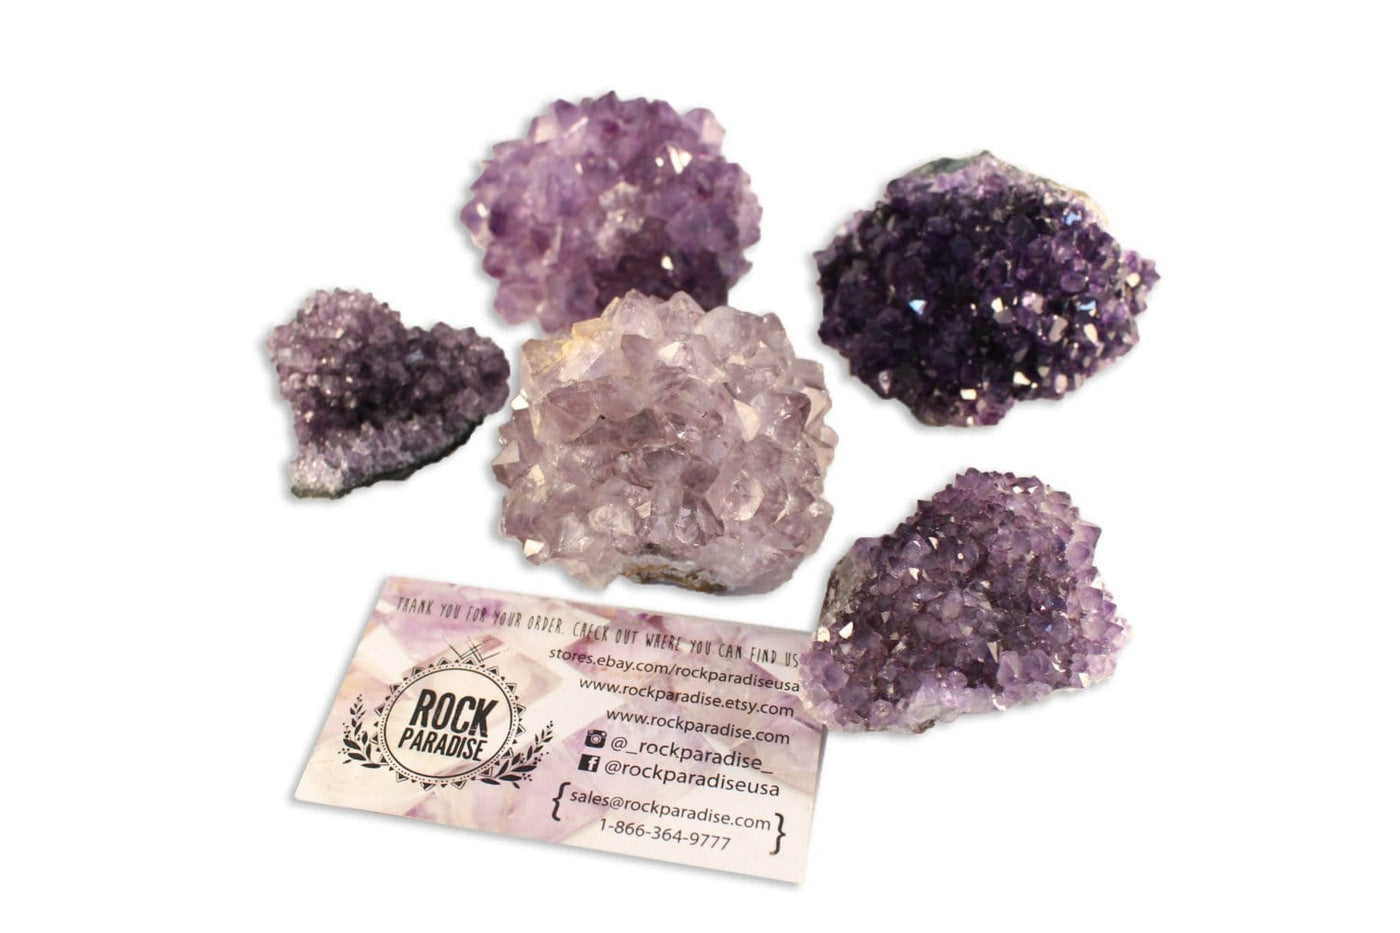 Picture of five Amethyst Pines displayed on a white background, next to one of our business cards.